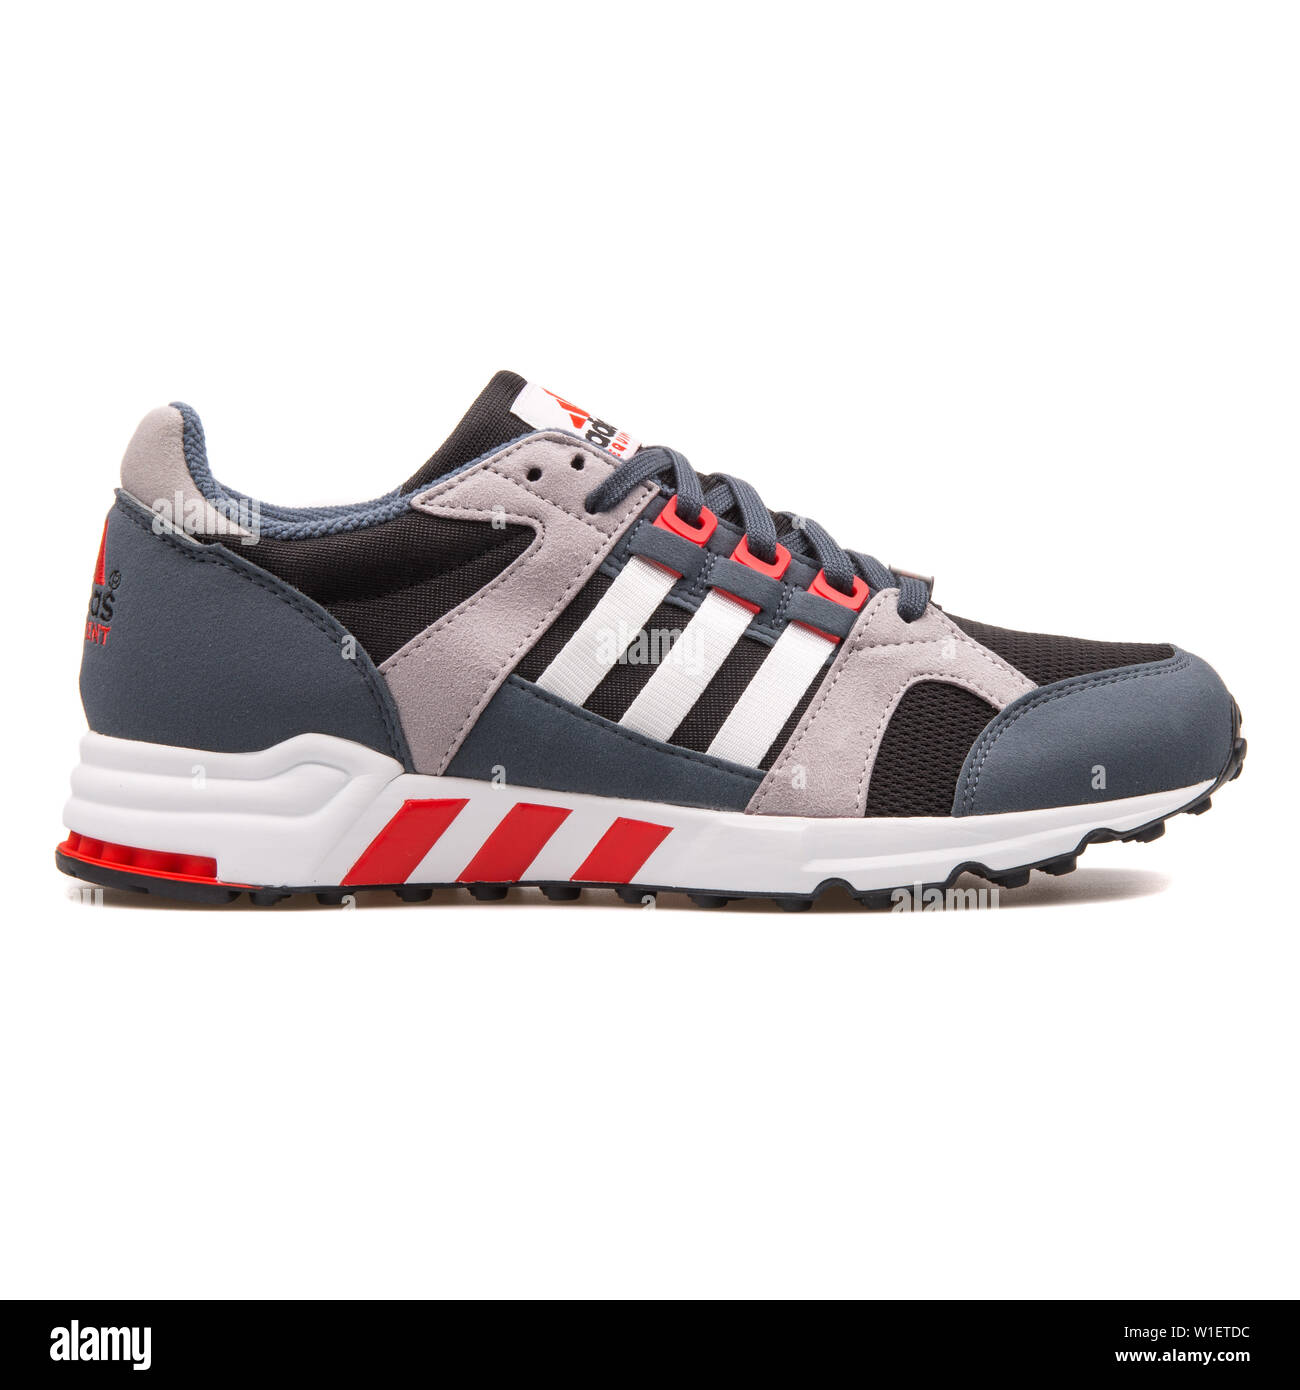 VIENNA, AUSTRIA - AUGUST 10, 2017: Adidas Equipment Running Cushion black,  blue, grey and red sneaker on white background Stock Photo - Alamy